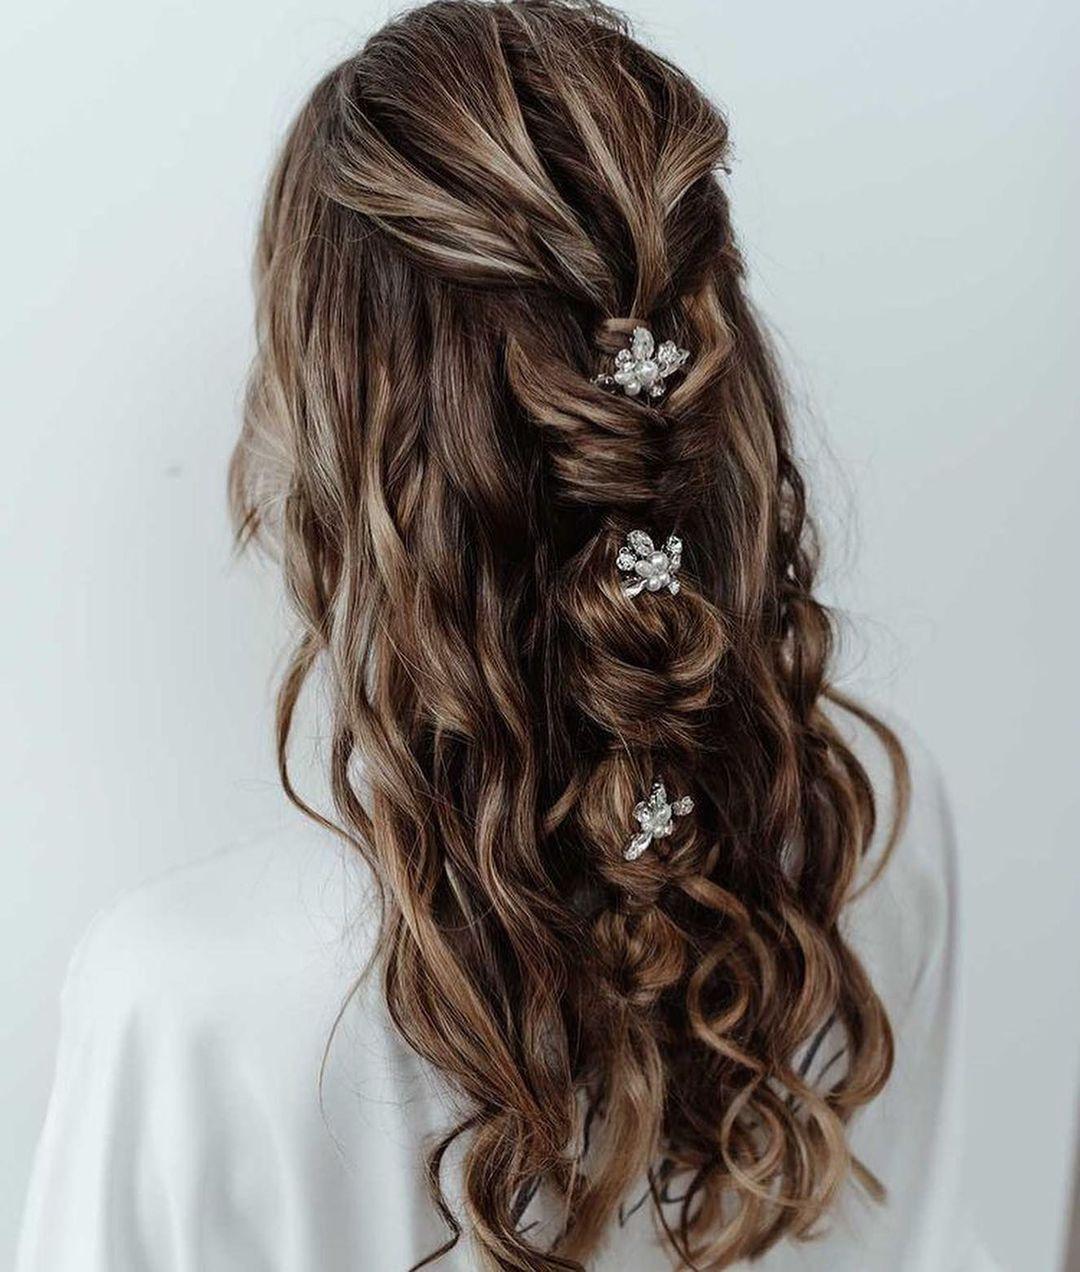 Half Up Half Down Wedding Hairstyles 23 Inspirational Ideas And Tips Uk 